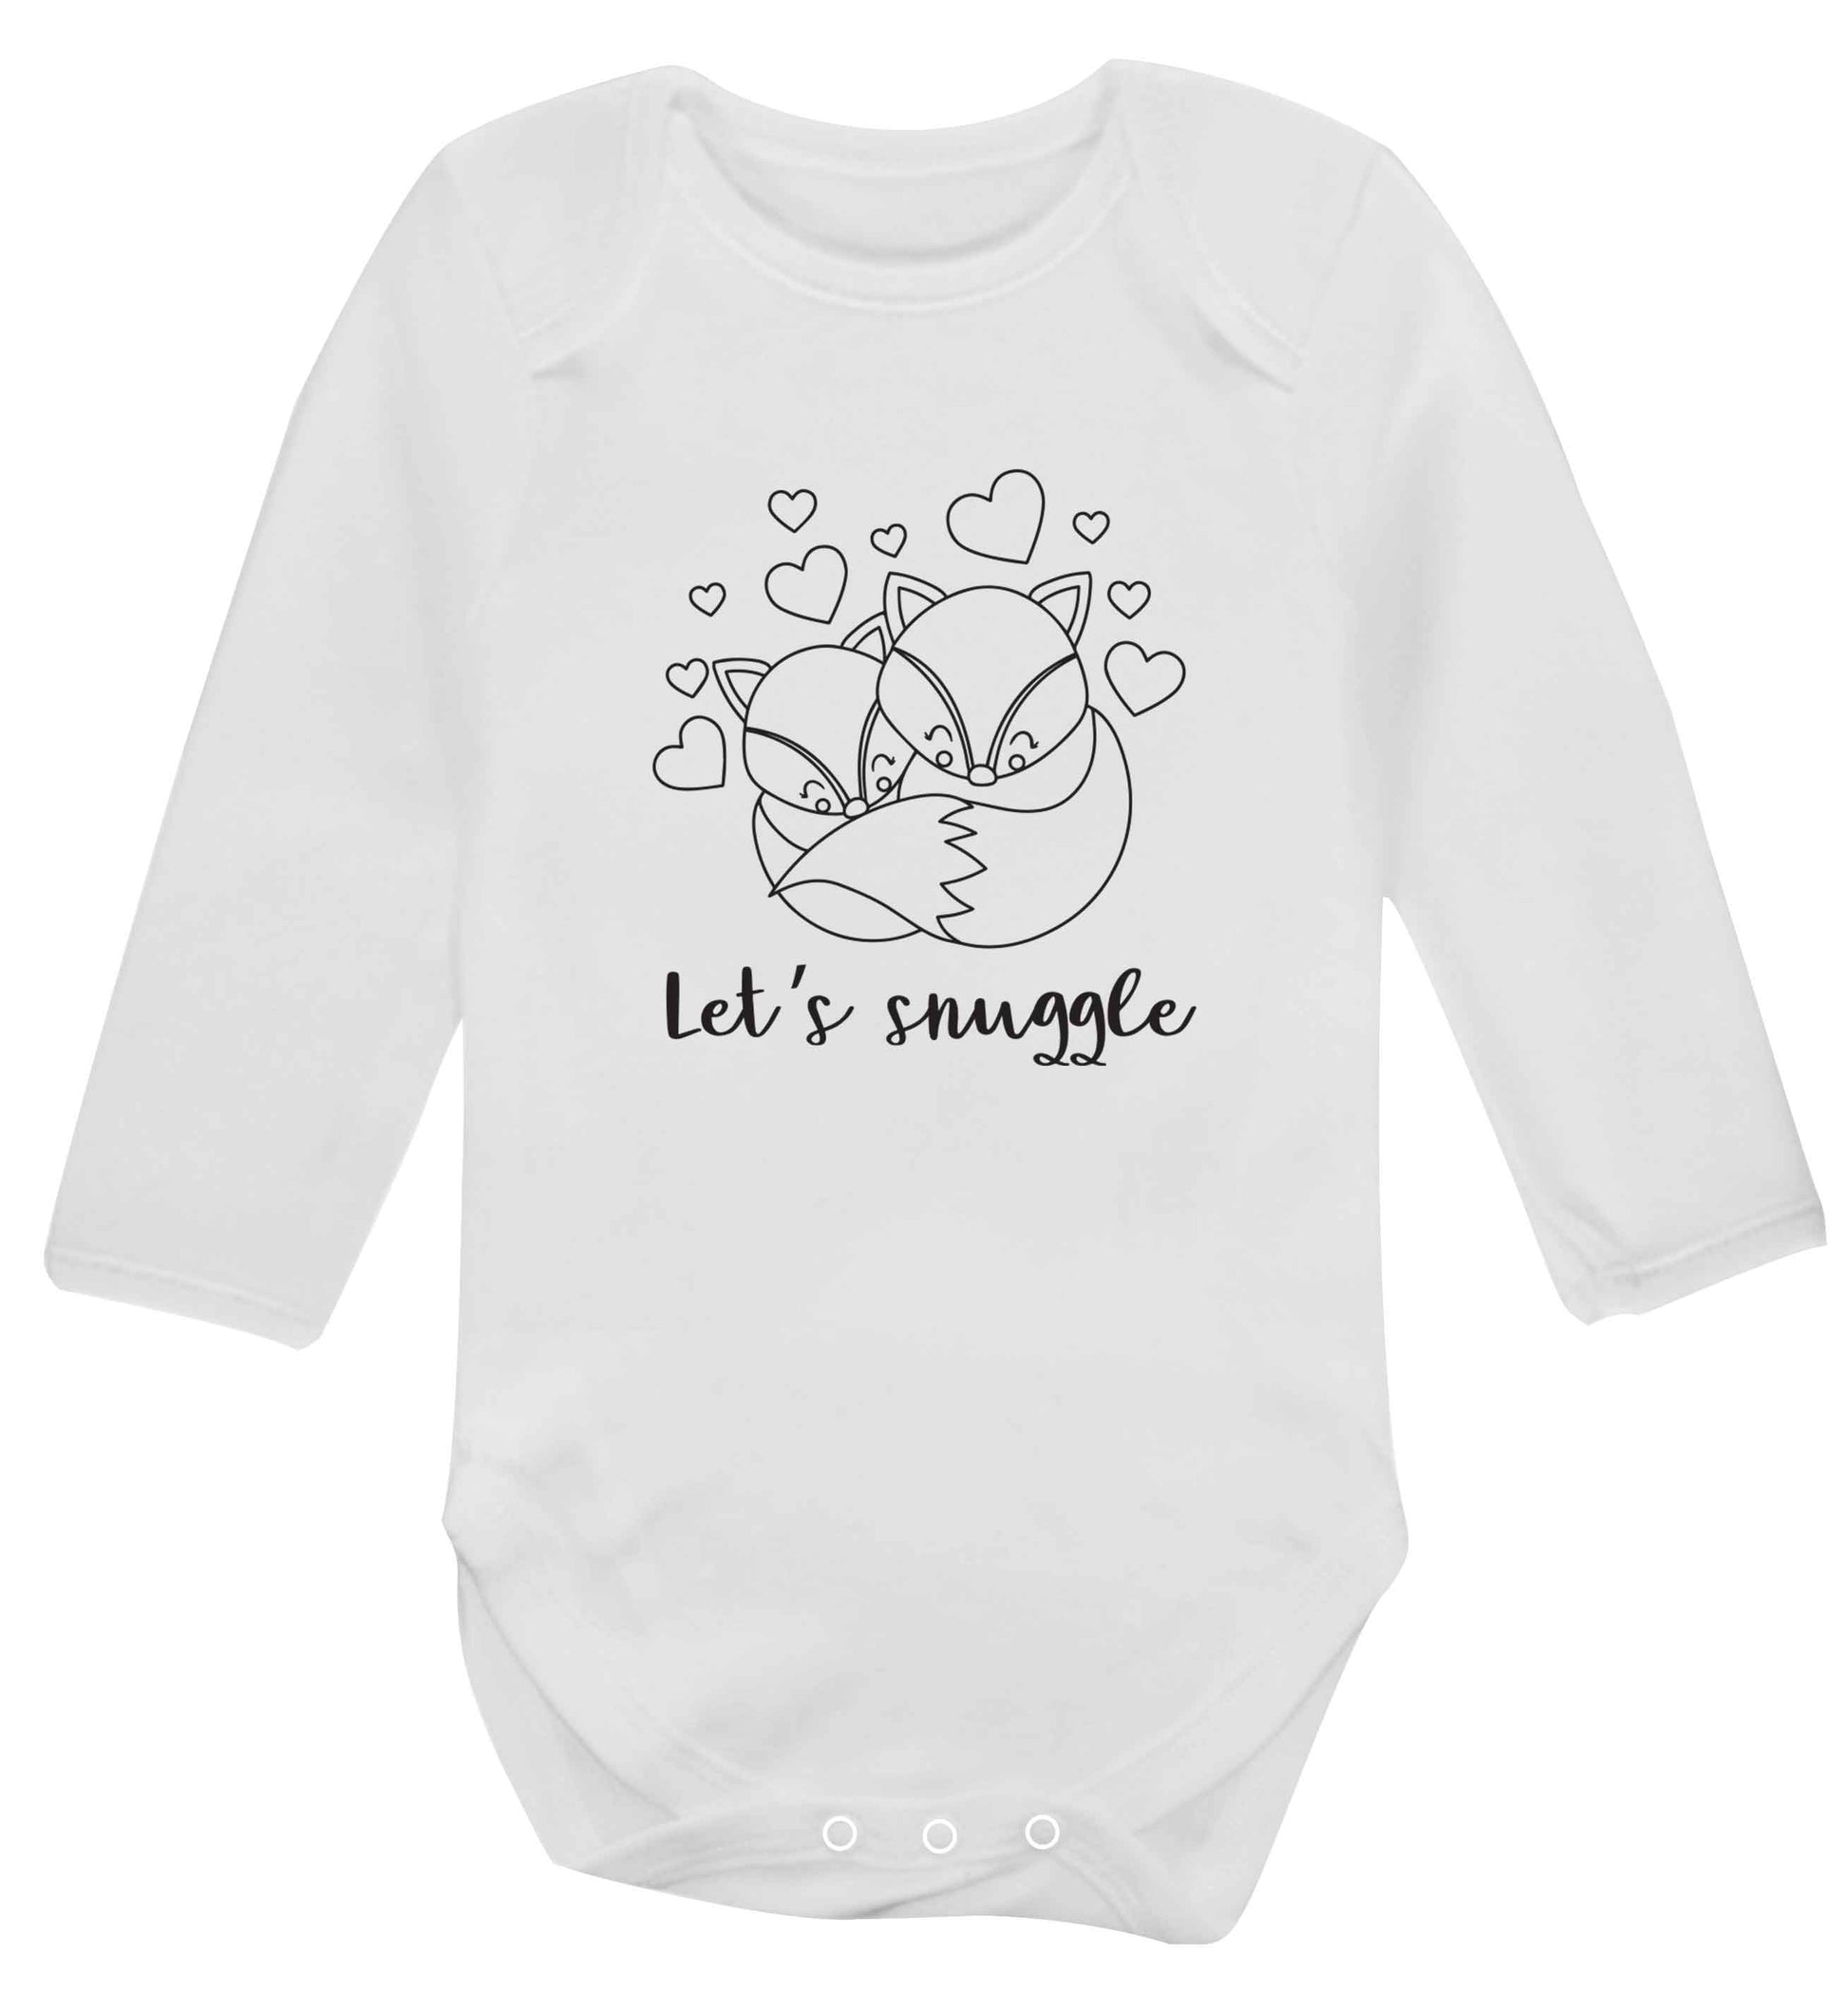 Let's snuggle baby vest long sleeved white 6-12 months